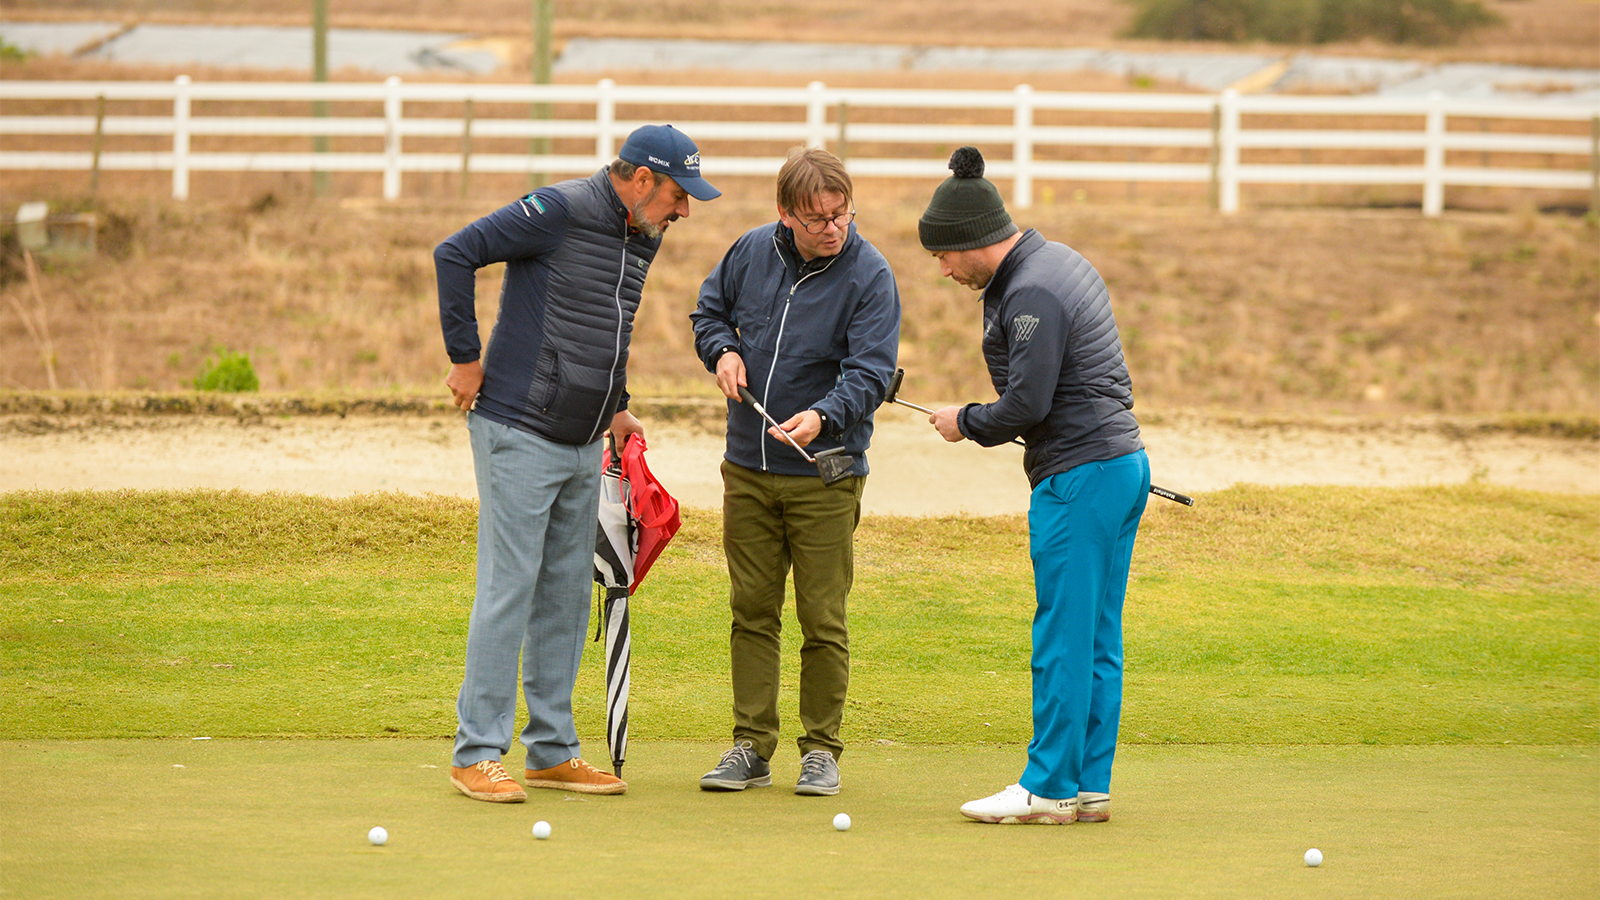 Attendees inspect putters on the putting green during DEMO day for the 2022 PGA Show at the Orange County National Golf Center on January 25, 2022 in Winter Garden, Florida. (Photo by Montana Pritchard/PGA of America)